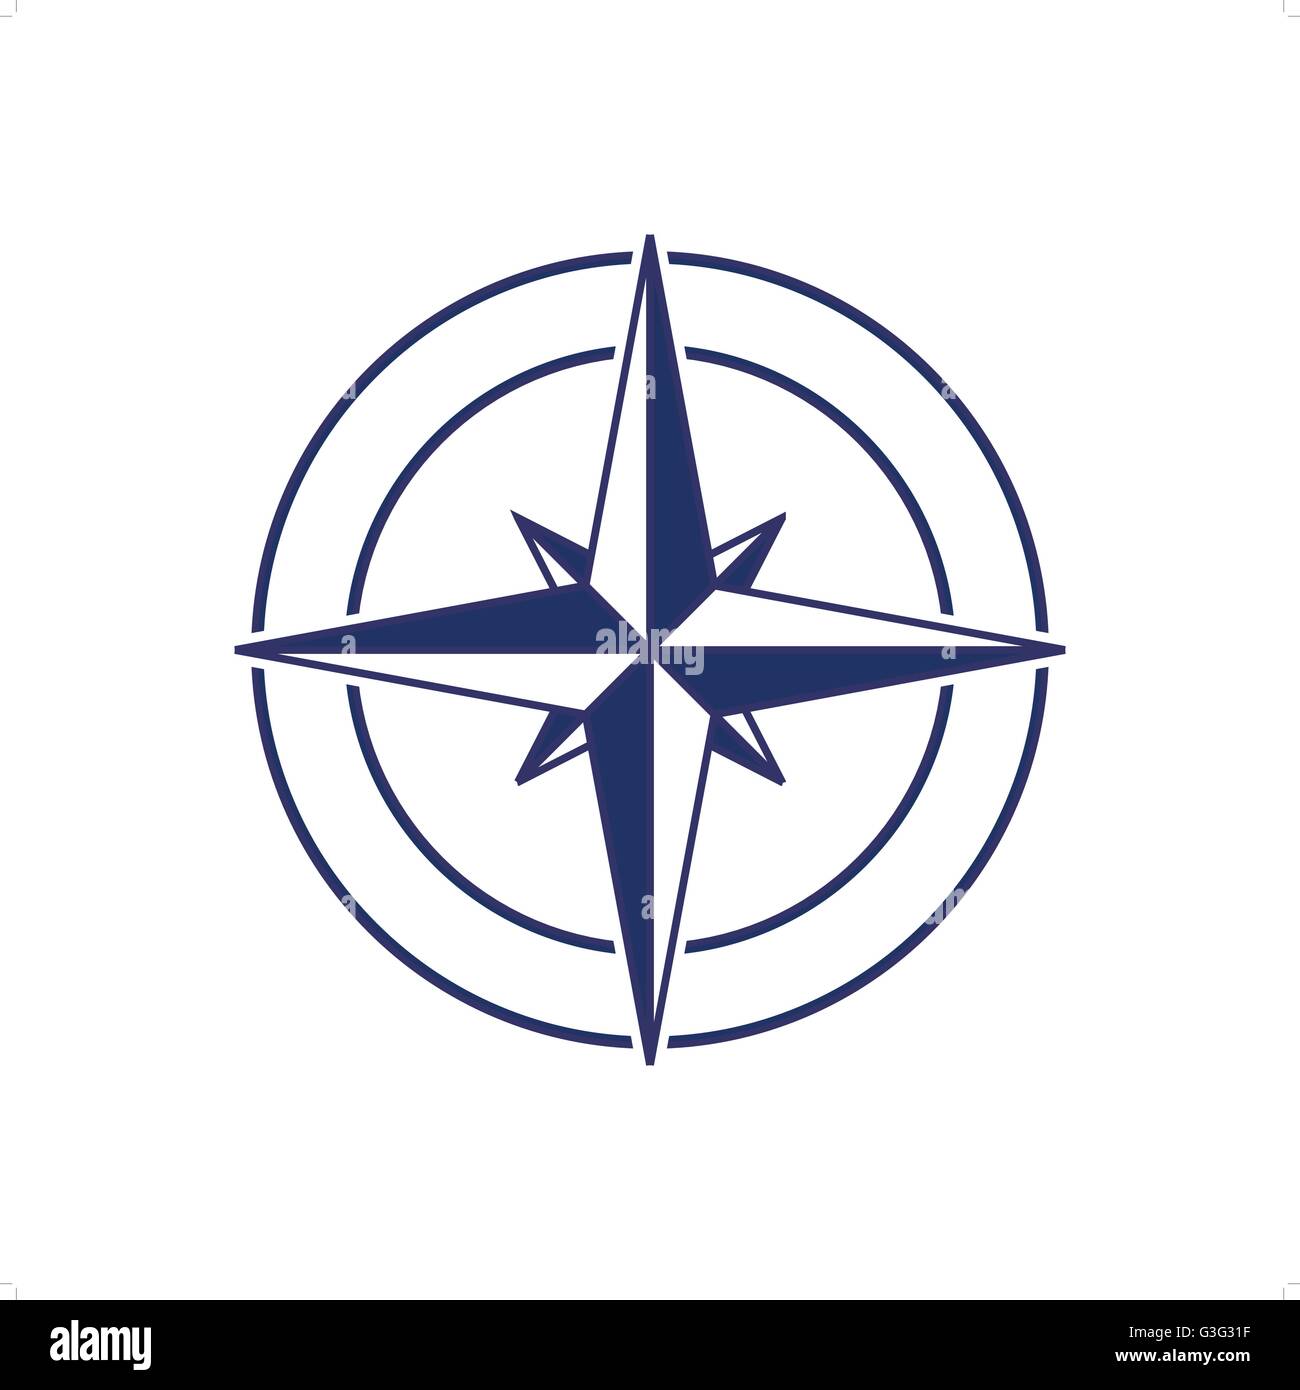 https://c8.alamy.com/comp/G3G31F/blue-compass-icon-inside-circle-vector-illustration-isolated-on-white-G3G31F.jpg